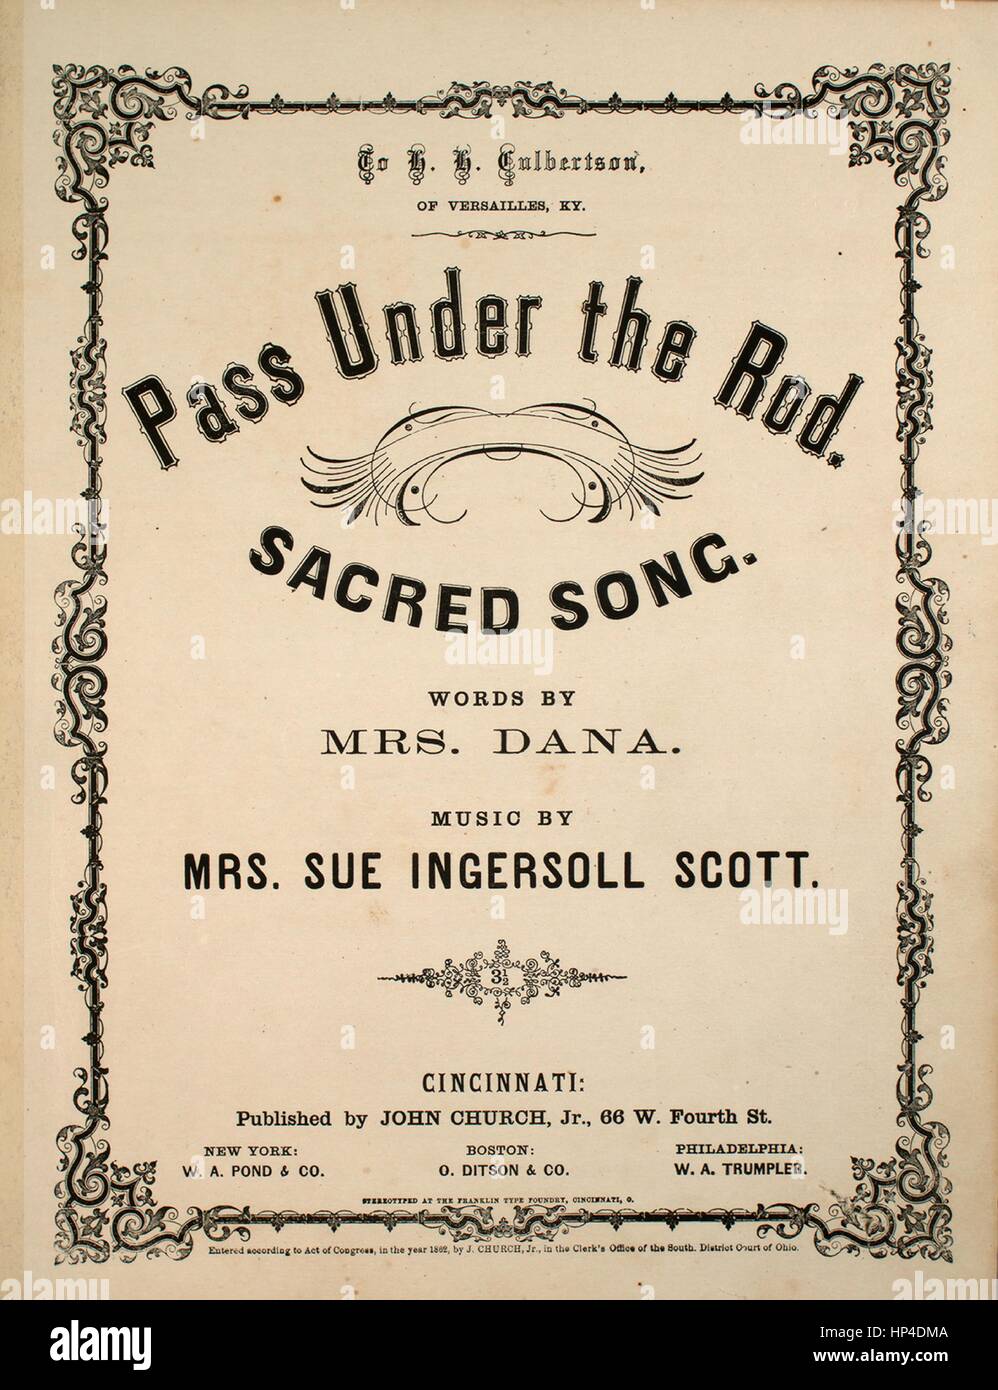 Sheet music cover image of the song 'Pass Under the Rod Sacred Song', with original authorship notes reading 'Words by Mrs Dana Music by Mrs Sue Ingersoll Scott', United States, 1862. The publisher is listed as 'John Church, Jr., 66 W. Fourth St.', the form of composition is 'strophic', the instrumentation is 'piano and voice', the first line reads 'I saw the young bride, in her beauty and pride', and the illustration artist is listed as 'Stereotyped at the Franklin Type Foundry, Cincinnati, O.'. Stock Photo